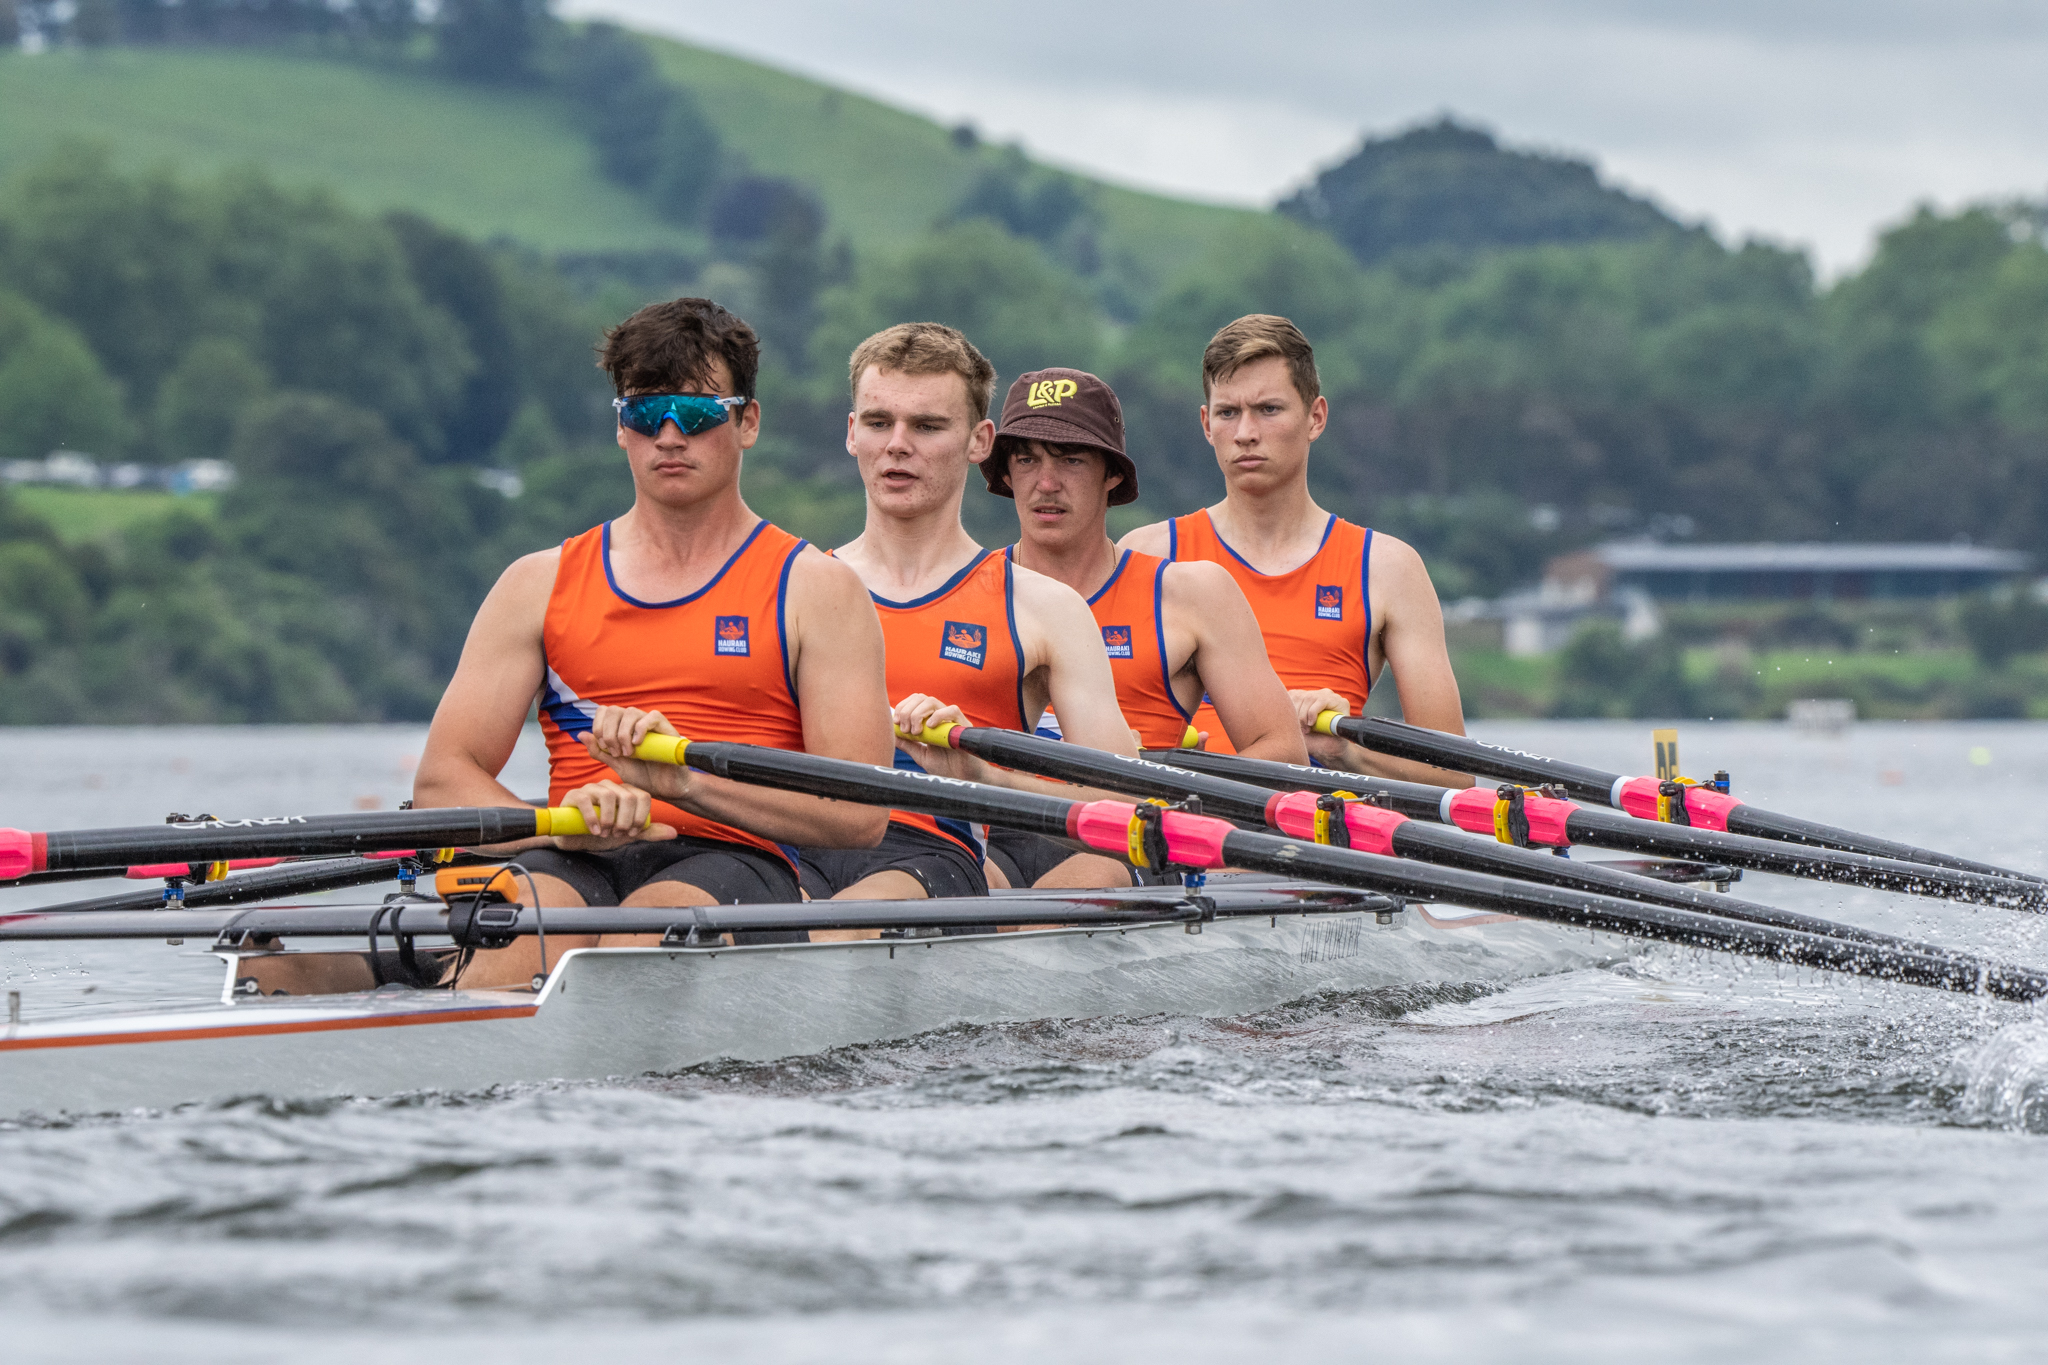 You are currently viewing Strokes of support for rowing club